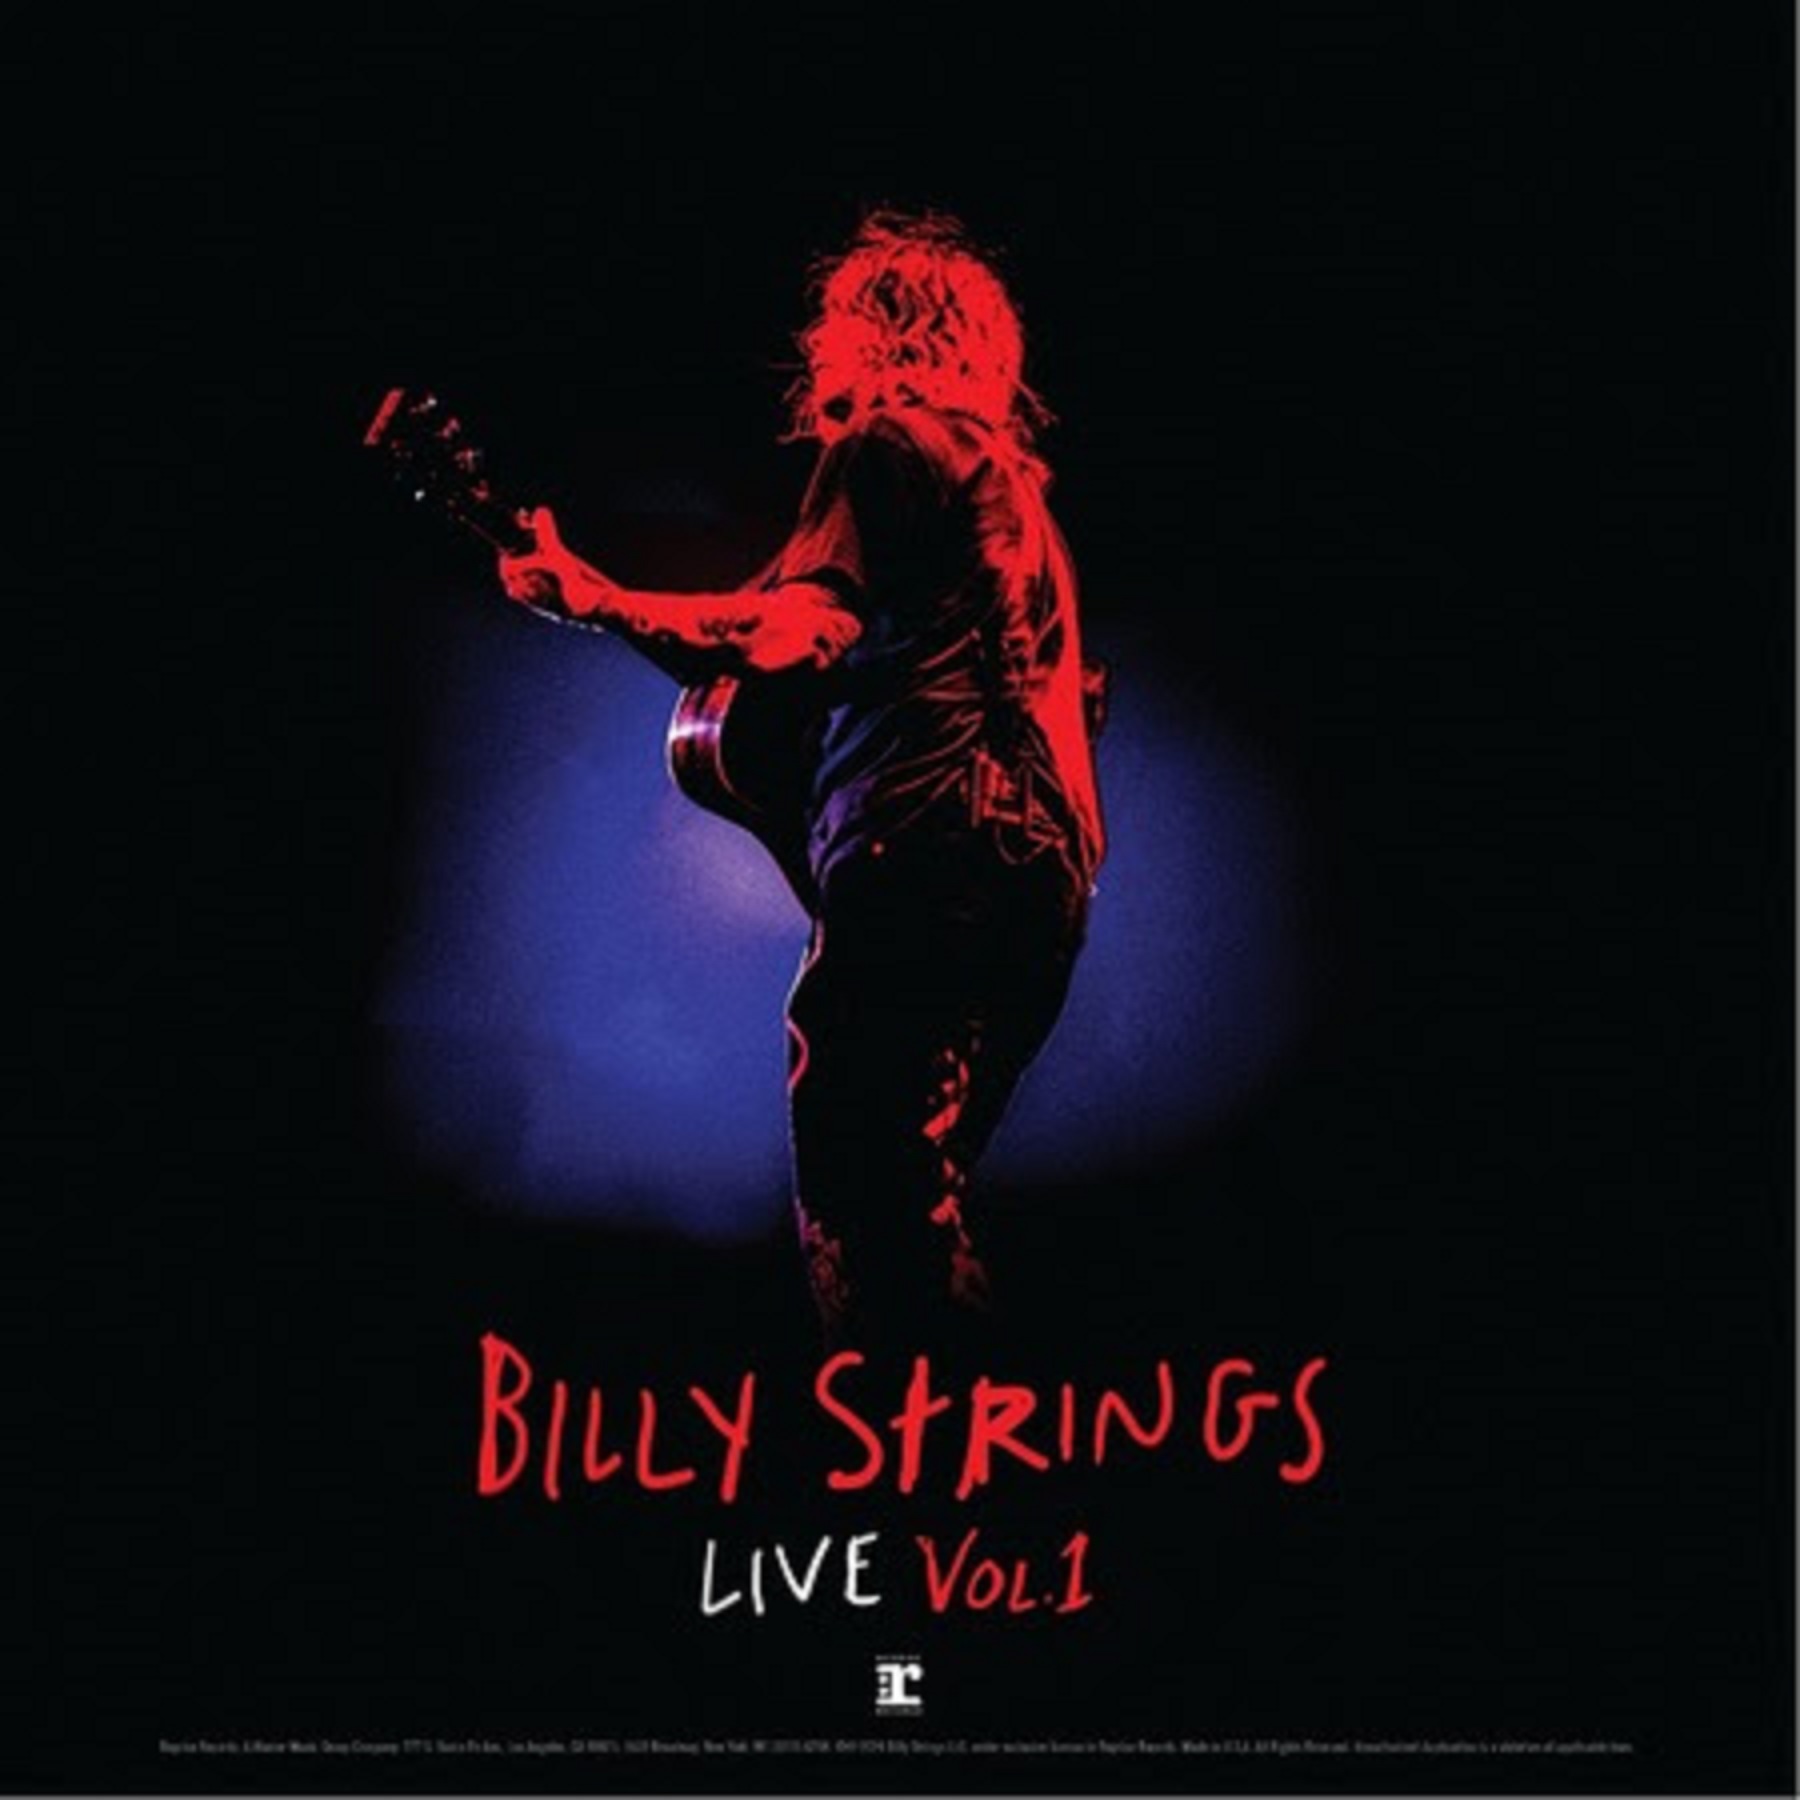 "Billy Strings Live Vol. 1" out July 12, fall tour confirmed